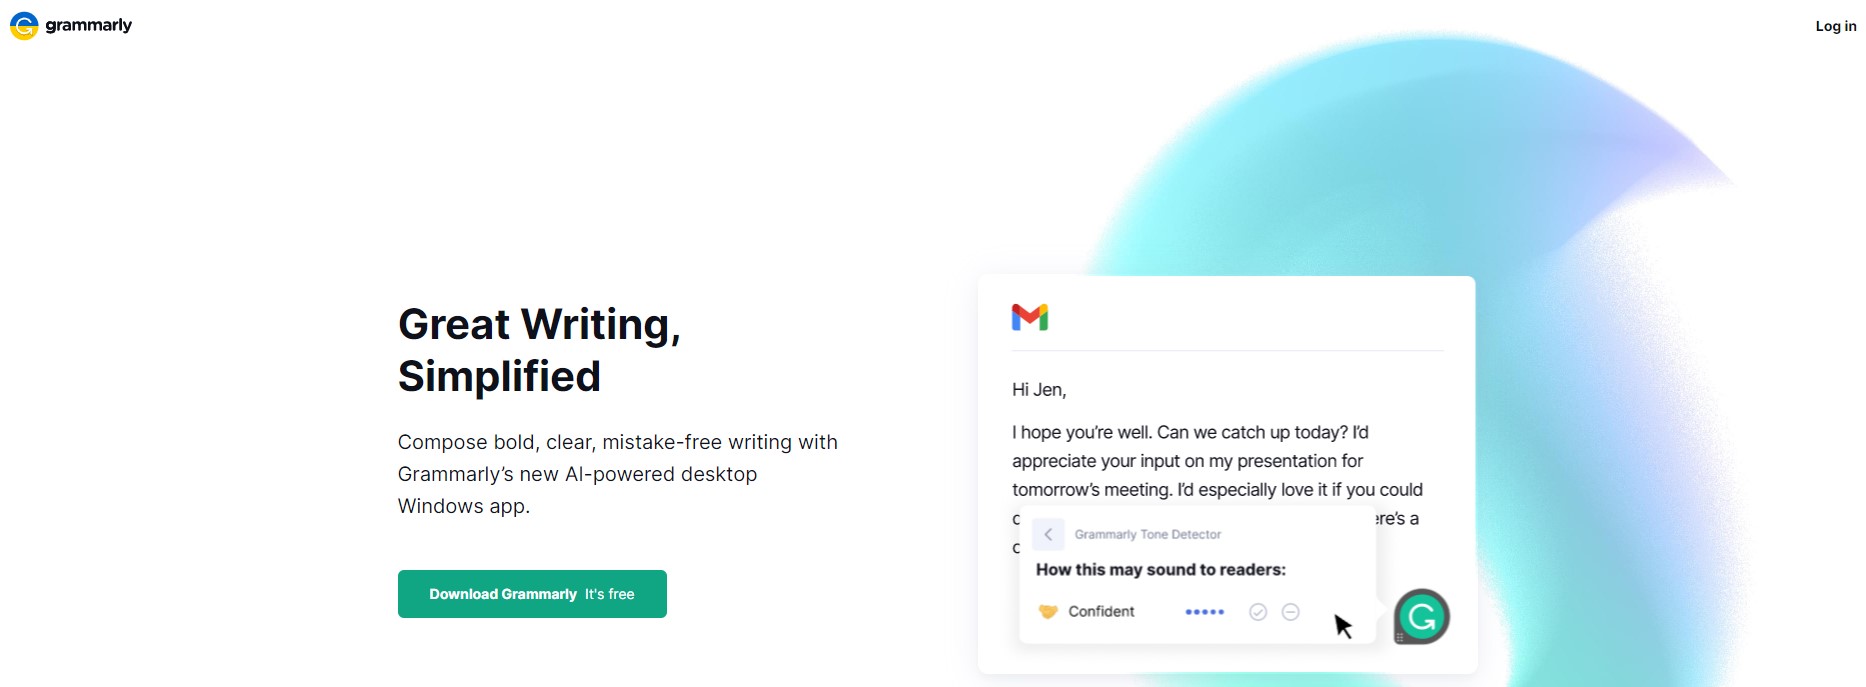 grammarly-detects-errors-in-the-written-text